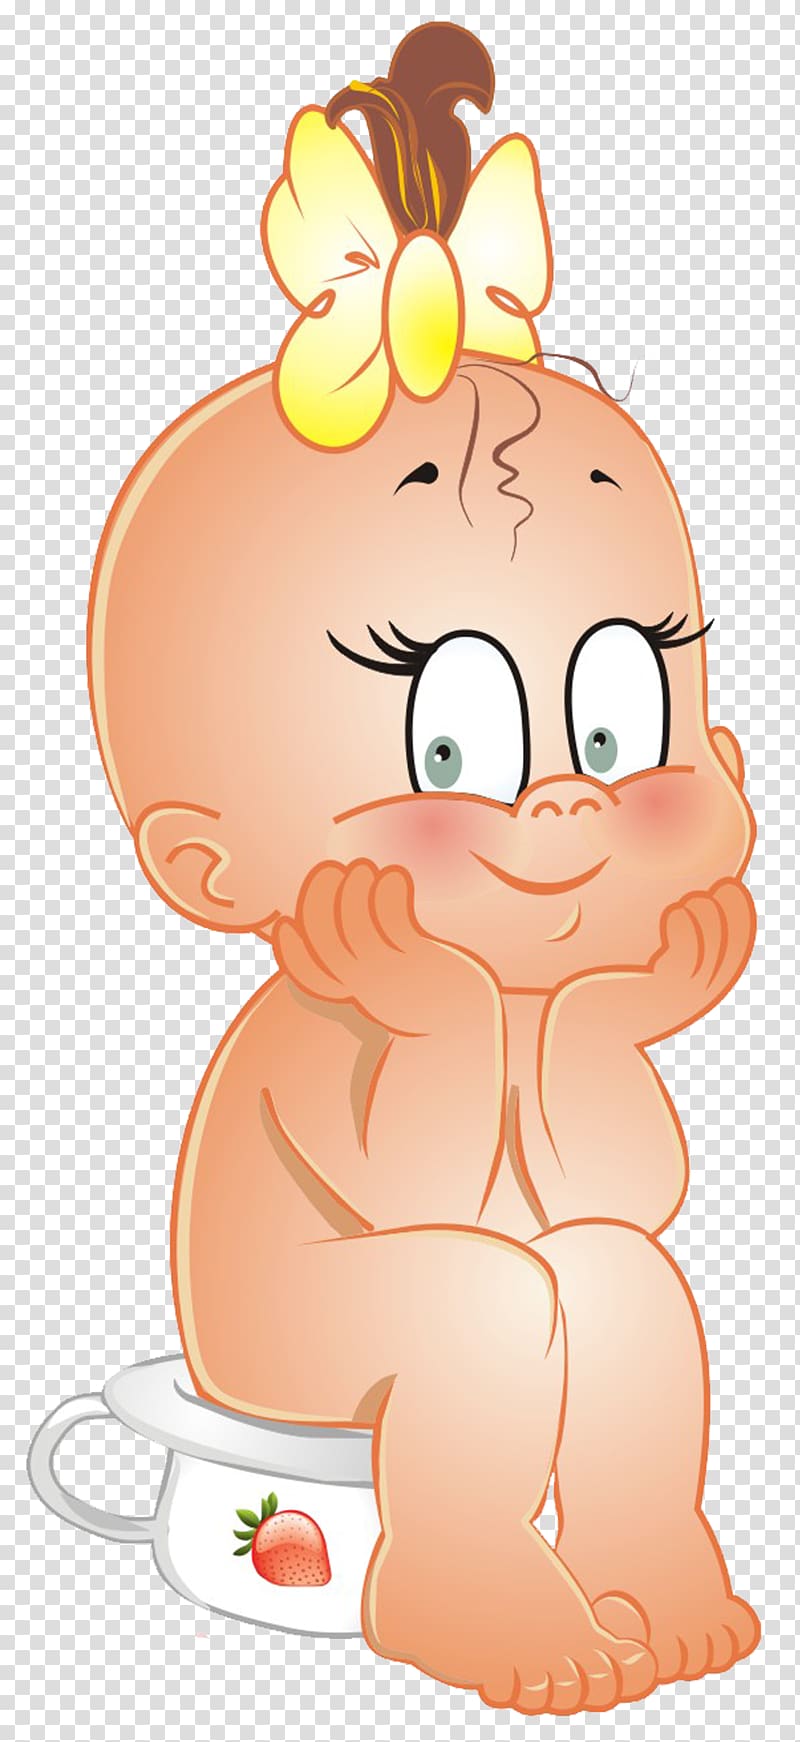 Infant Cartoon , Baby Girl with Yellow Bow Cartoon Free , toddler sitting on pot with hands supporting chin transparent background PNG clipart